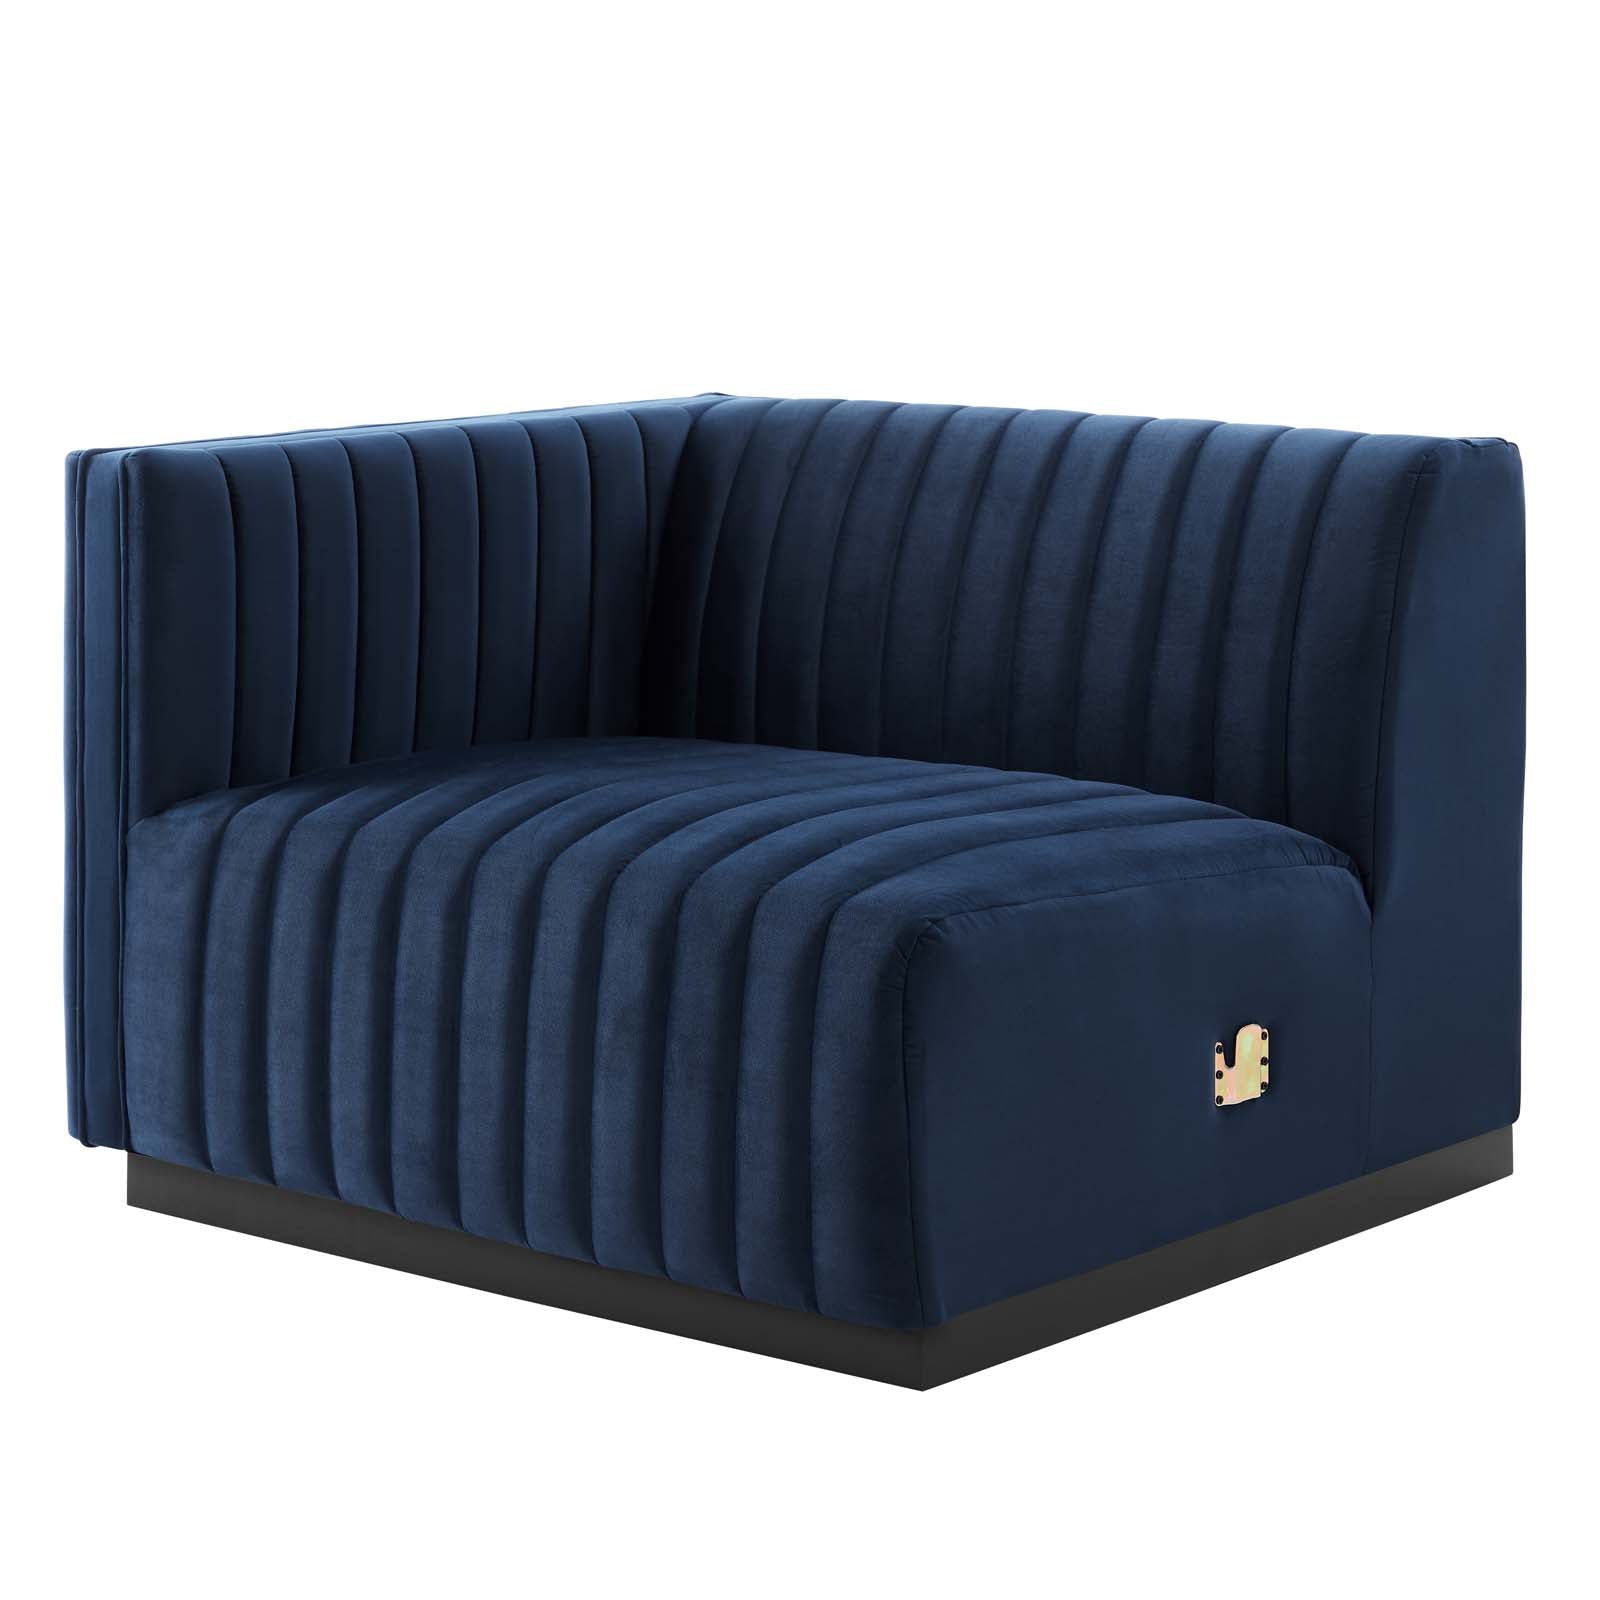 Modway Sectional Sofas - Conjure Channel Tufted Performance Velvet 6-Piece Sectional Black Midnight Blue